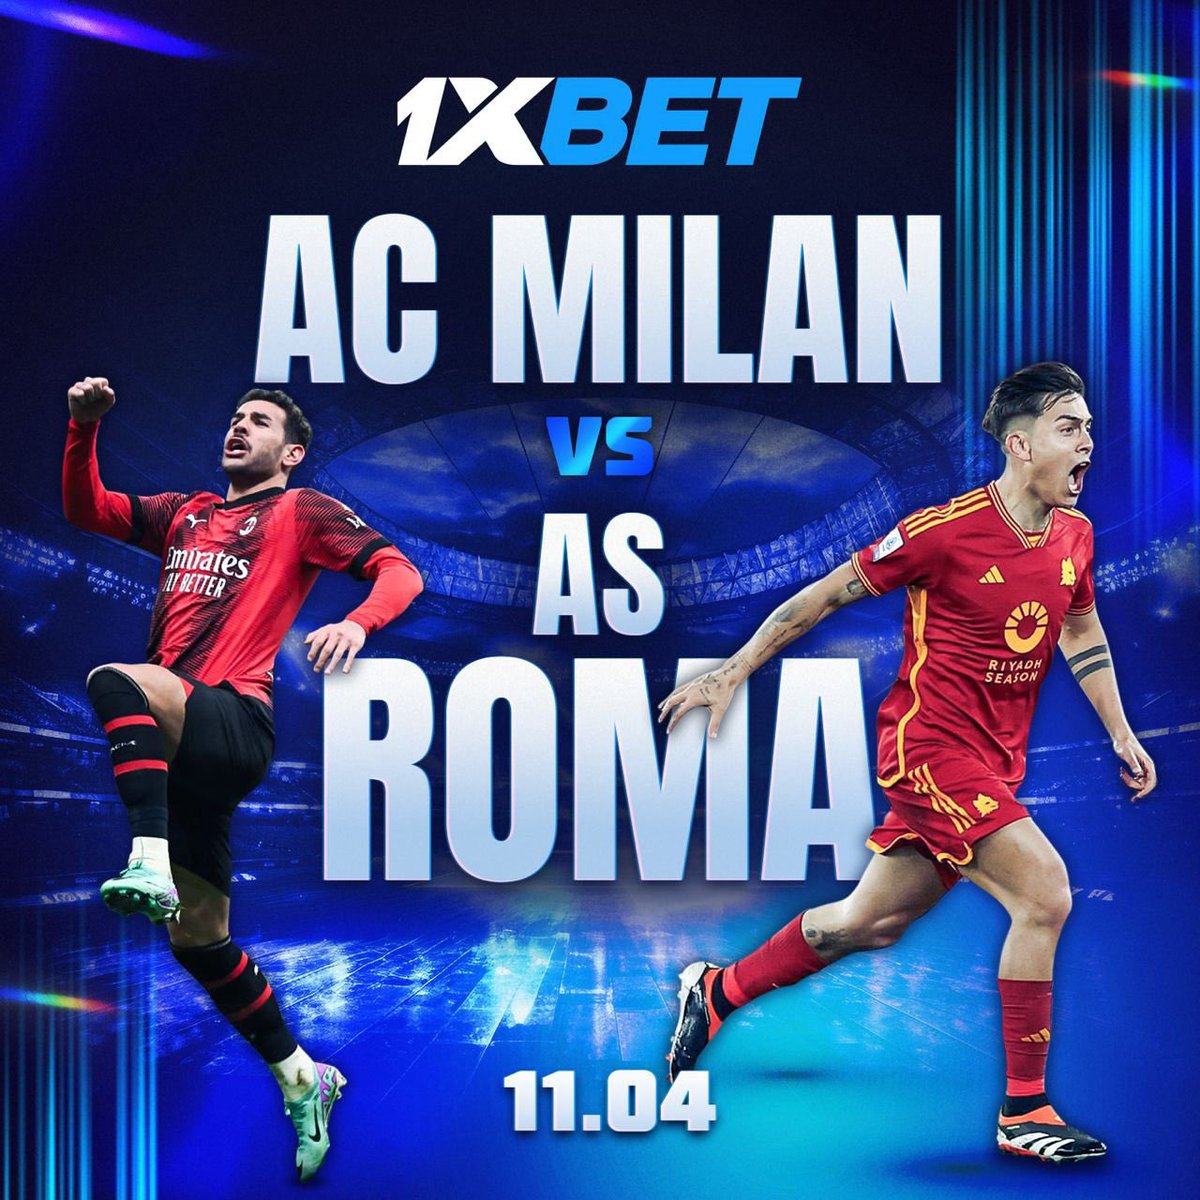 💥🇮🇹Fierce Brawl: Milan — Roma Two Italian titans clash in an epic battle for Europa League semi-final ticket! Roma is yet to win AC Milan in the last 9 games. Will this be their first win in a long time? Triple your money the reliable bookmaker 1xBet! Register & bet using…